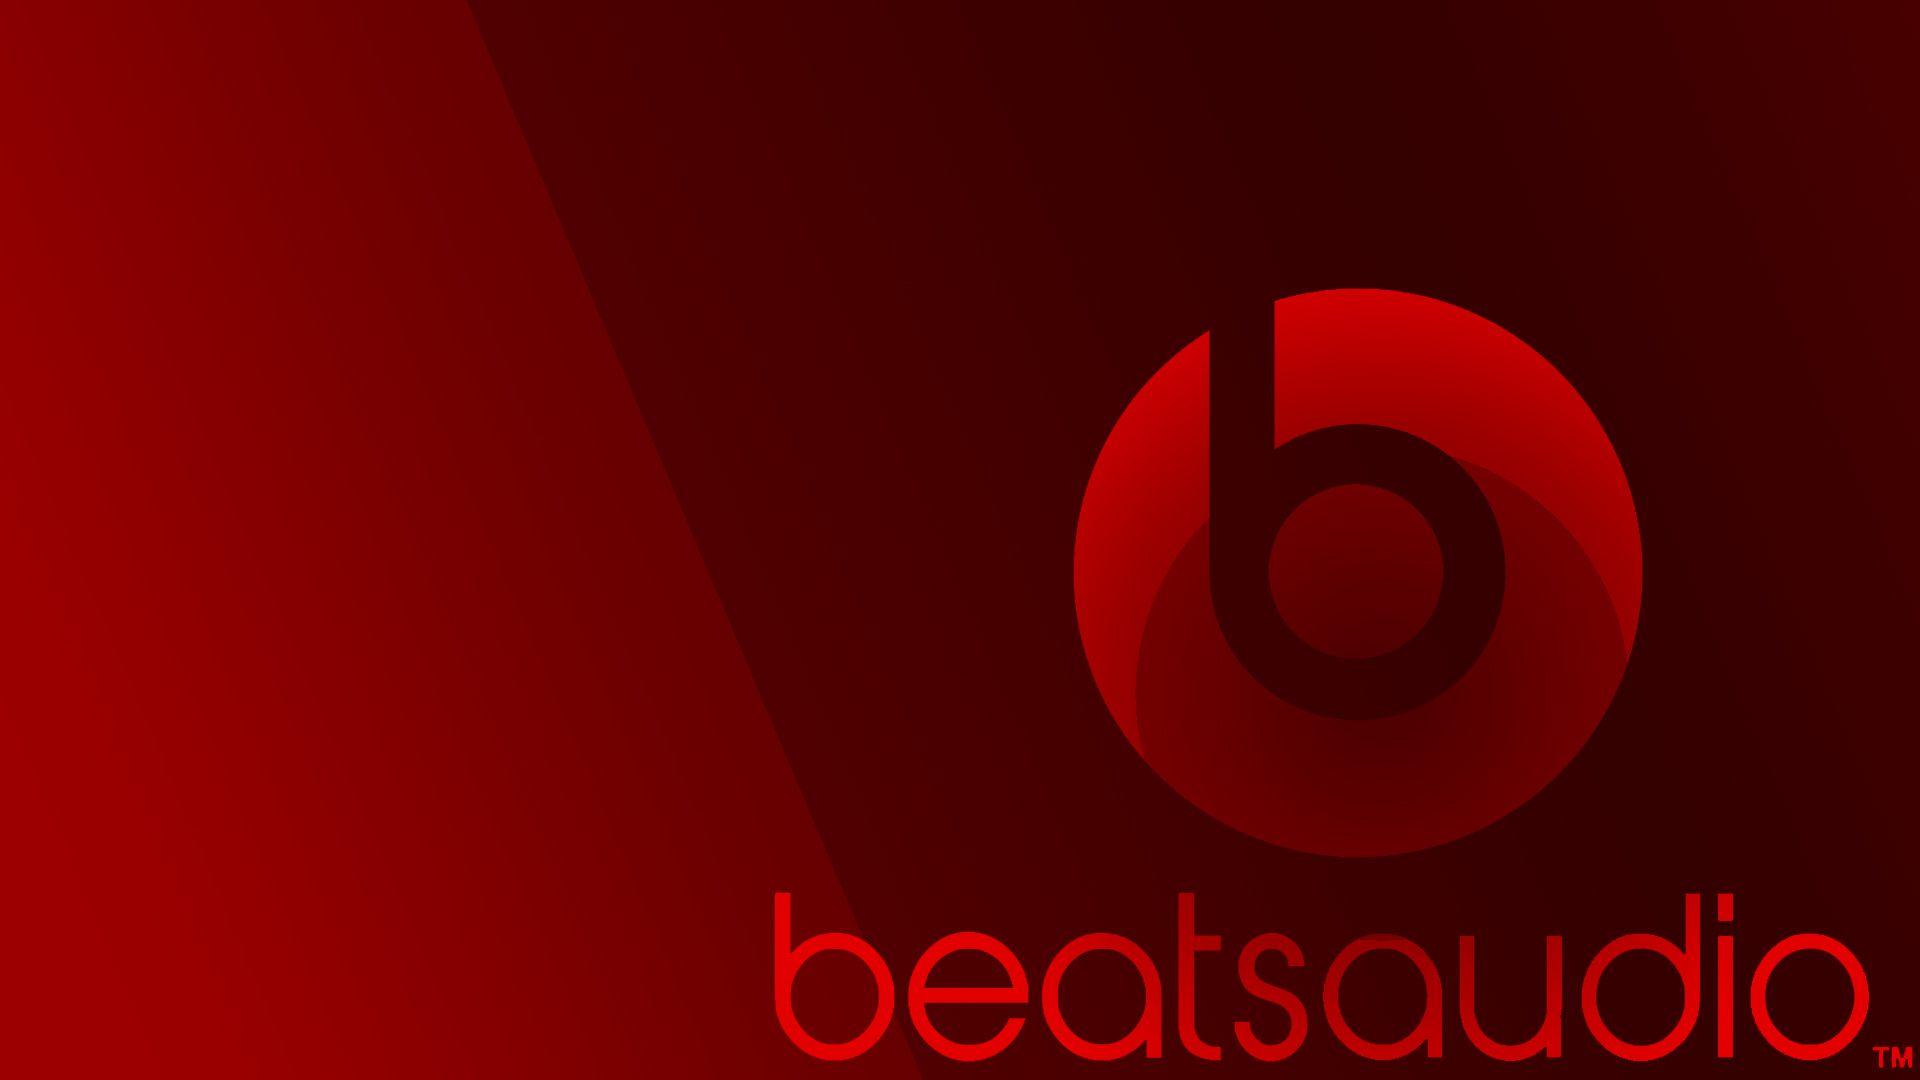 Beats HD Wallpaper For Mobile